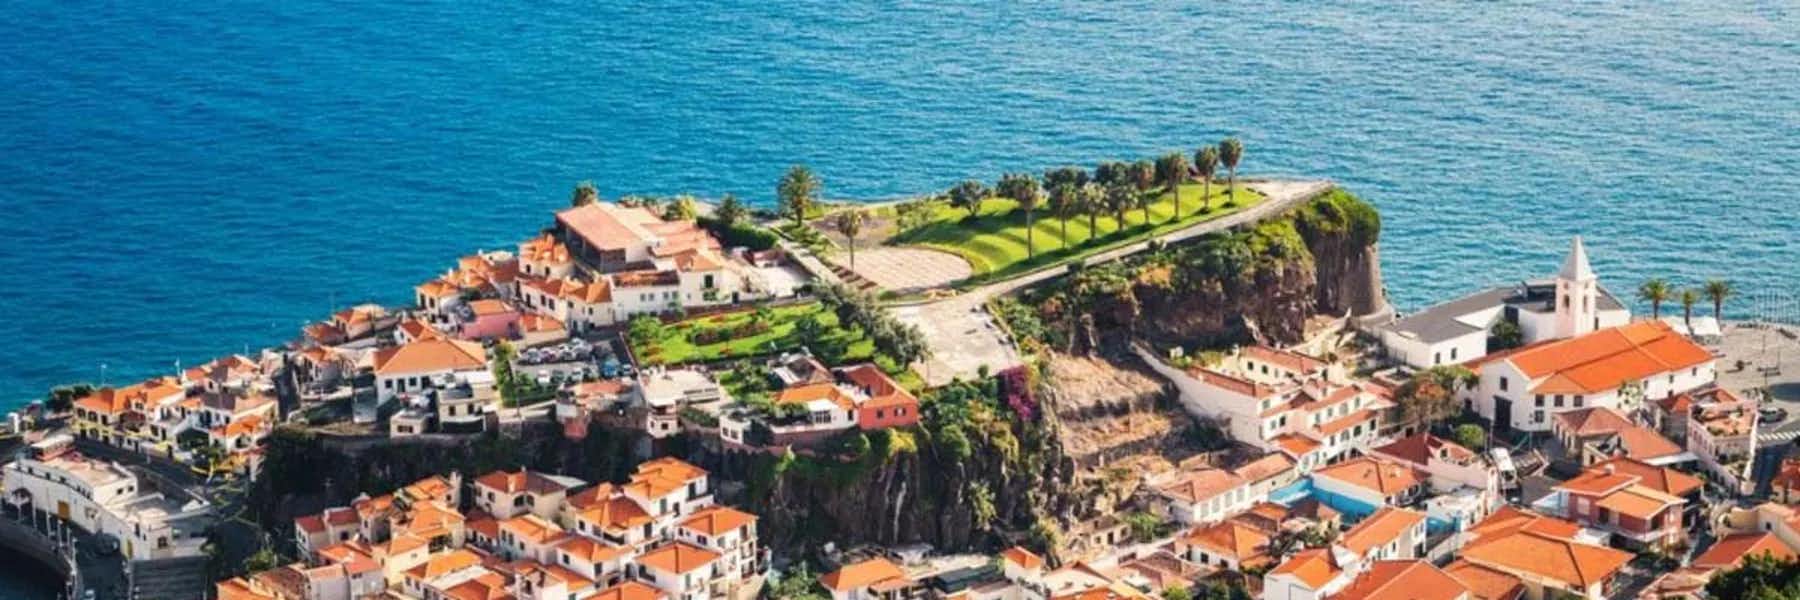 What to See and Do on Portugal's Island of Madeira